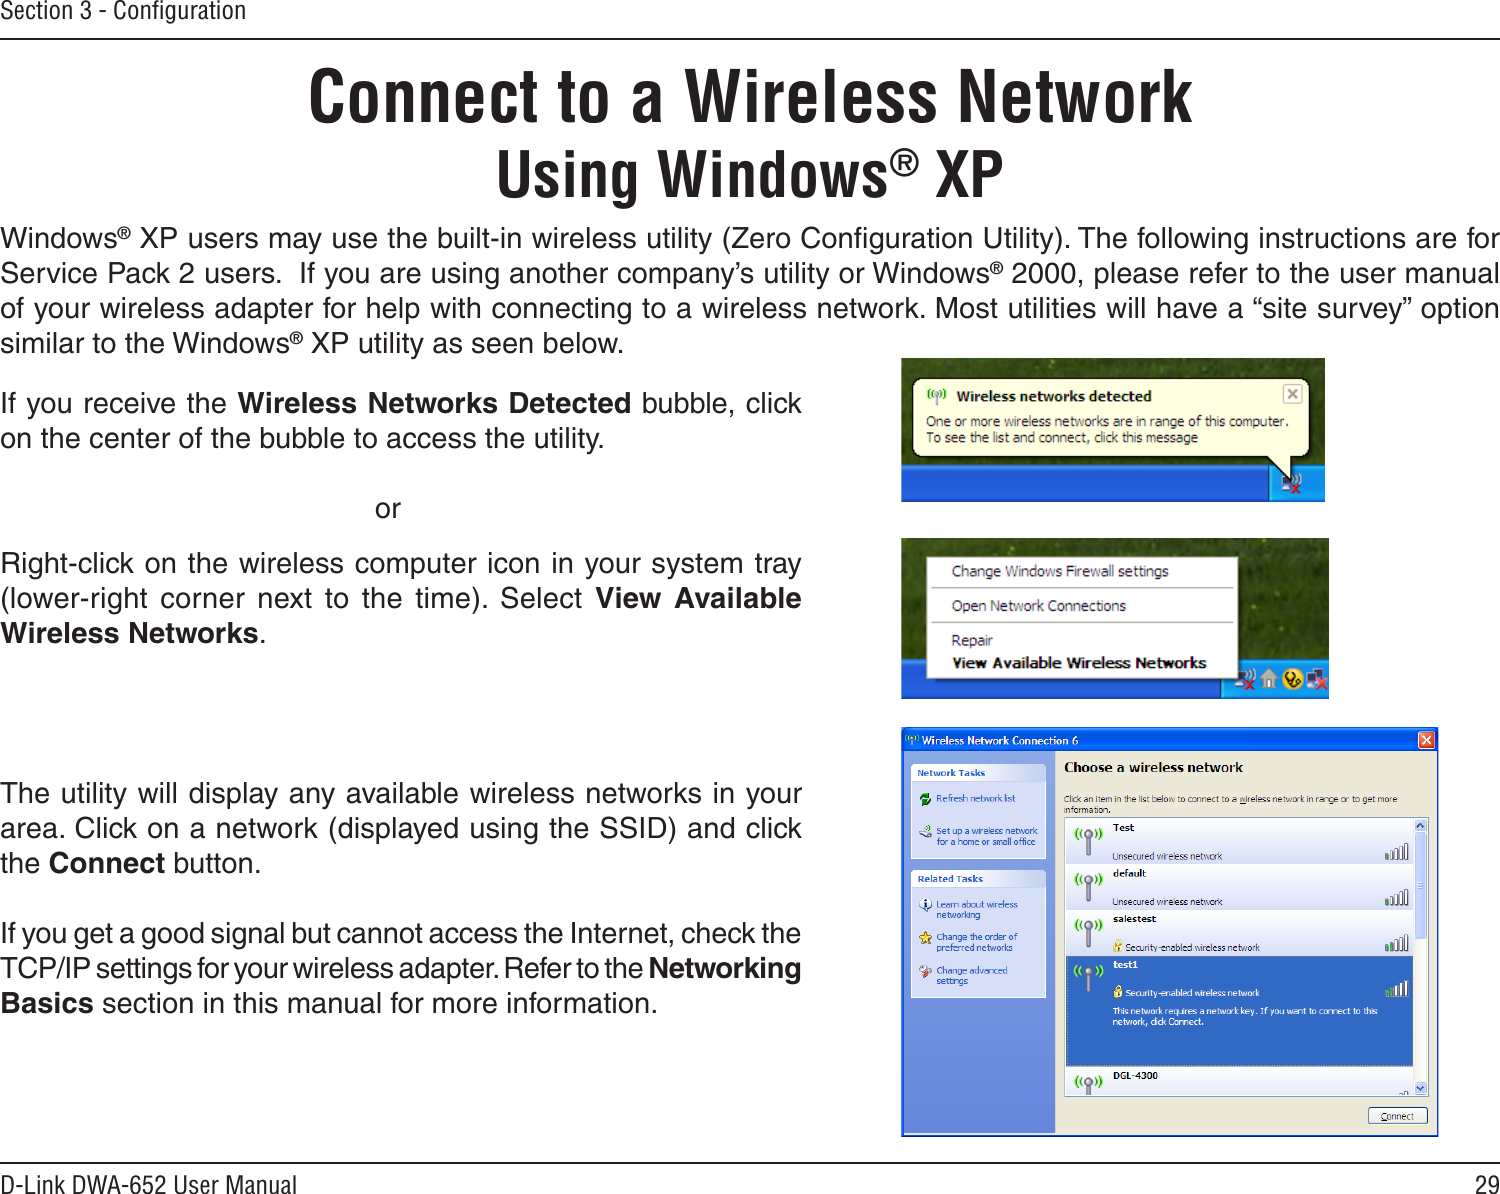 29D-Link DWA-652 User ManualSection 3 - ConﬁgurationConnect to a Wireless NetworkUsing Windows® XPWindows® XP users may use the built-in wireless utility (Zero Conﬁguration Utility). The following instructions are for Service Pack 2 users.  If you are using another company’s utility or Windows® 2000, please refer to the user manual of your wireless adapter for help with connecting to a wireless network. Most utilities will have a “site survey” option similar to the Windows® XP utility as seen below.Right-click on the wireless computer icon in your system tray (lower-right  corner  next  to  the  time).  Select  View  Available Wireless Networks.If you receive the Wireless Networks Detected bubble, click on the center of the bubble to access the utility.     orThe utility will display any available wireless networks in your area. Click on a network (displayed using the SSID) and click the Connect button.If you get a good signal but cannot access the Internet, check the TCP/IP settings for your wireless adapter. Refer to the Networking Basics section in this manual for more information.